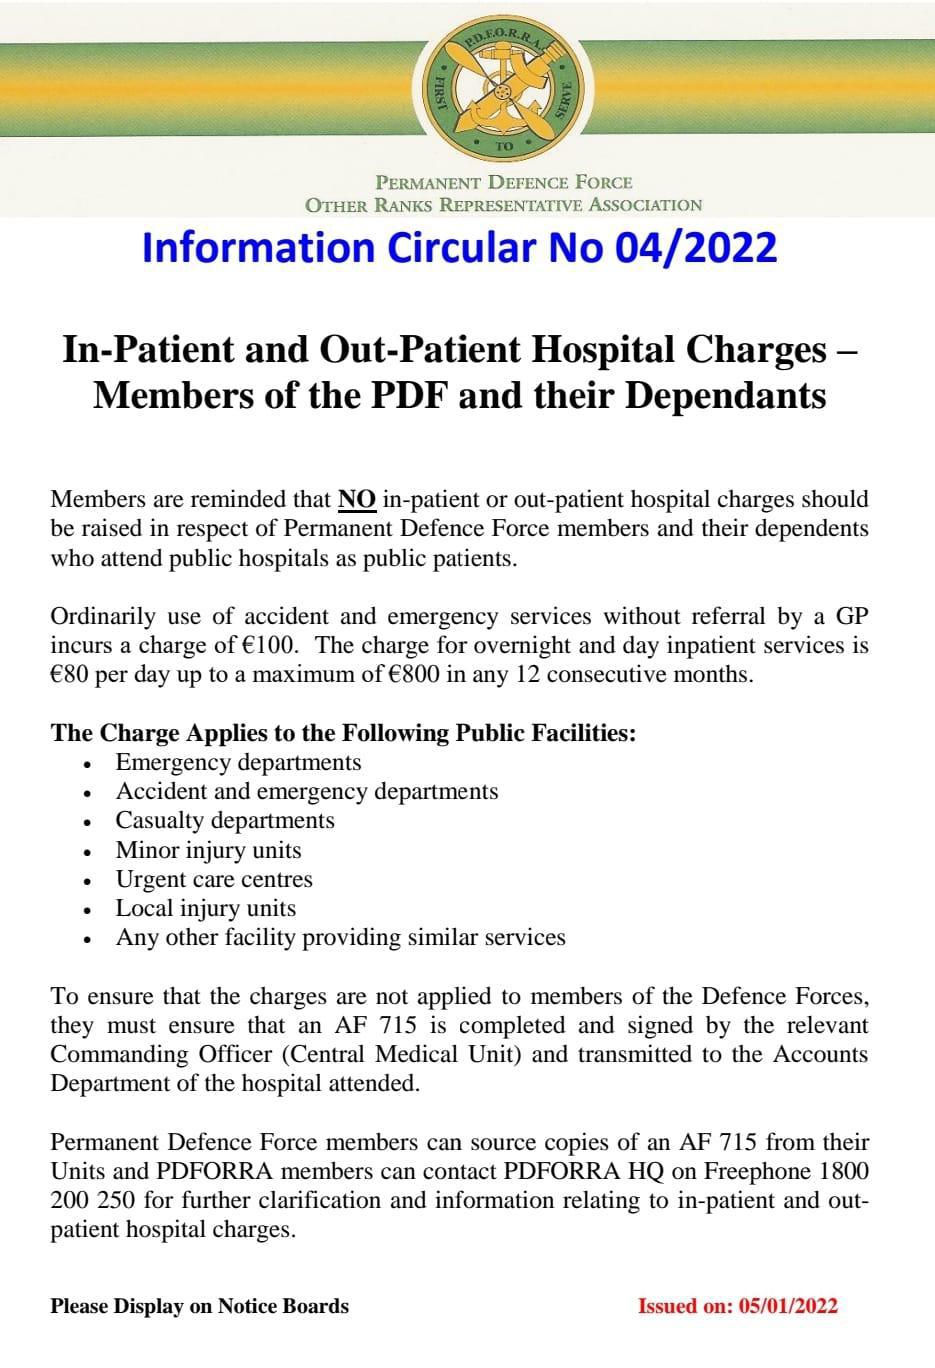 Information Circular No 04 of 22 - Inpatient & Outpatient charges members of the Defence Forces & their Dependents 